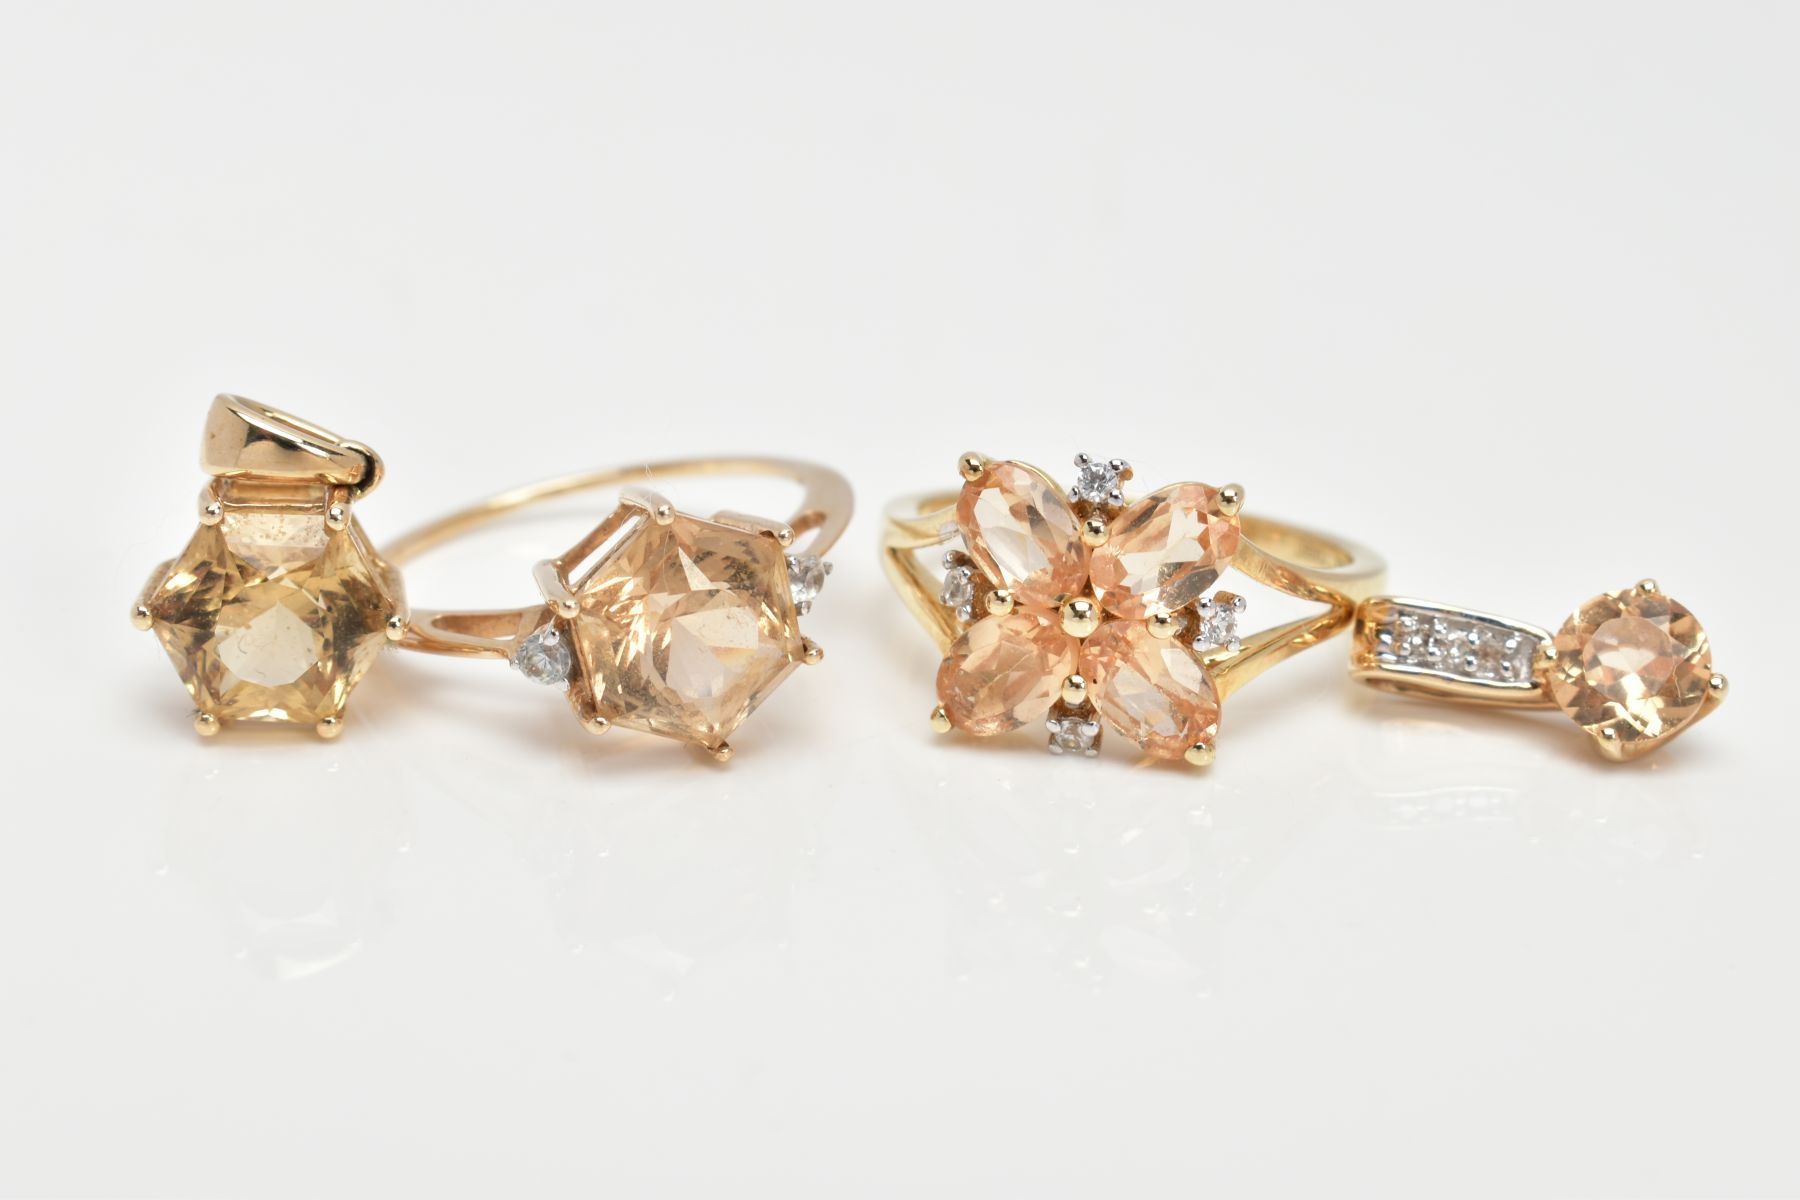 TWO 9CT GOLD CITRINE RINGS AND TWO PENDANTS, the first designed with a six claw set hexagonal cut